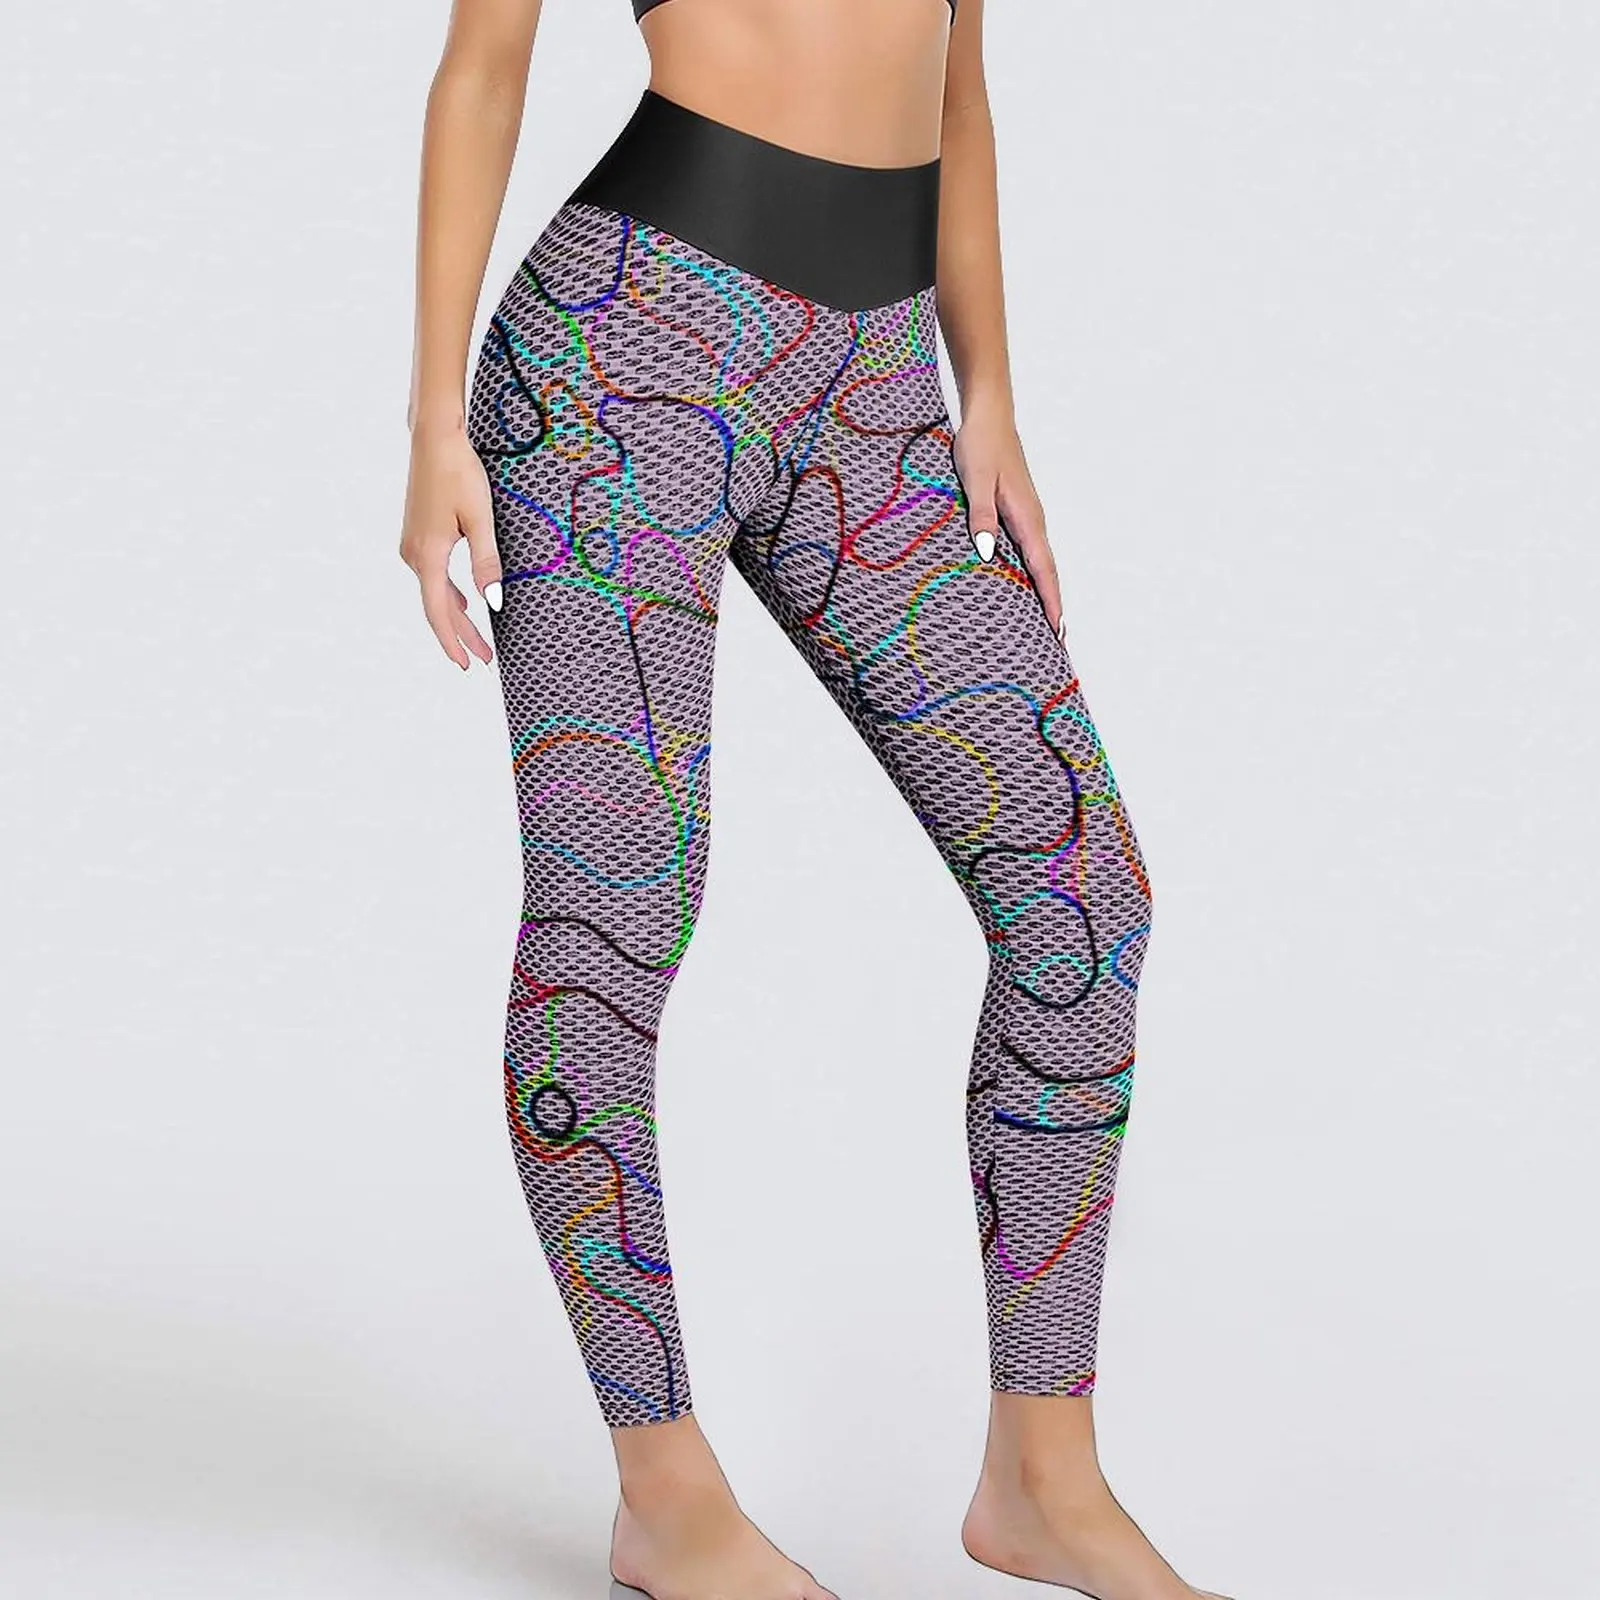 

Curvy Lines Leggings Sexy Colorful Print Workout Gym Yoga Pants Push Up Seamless Sports Tights Women Sweet Graphic Leggins Gift